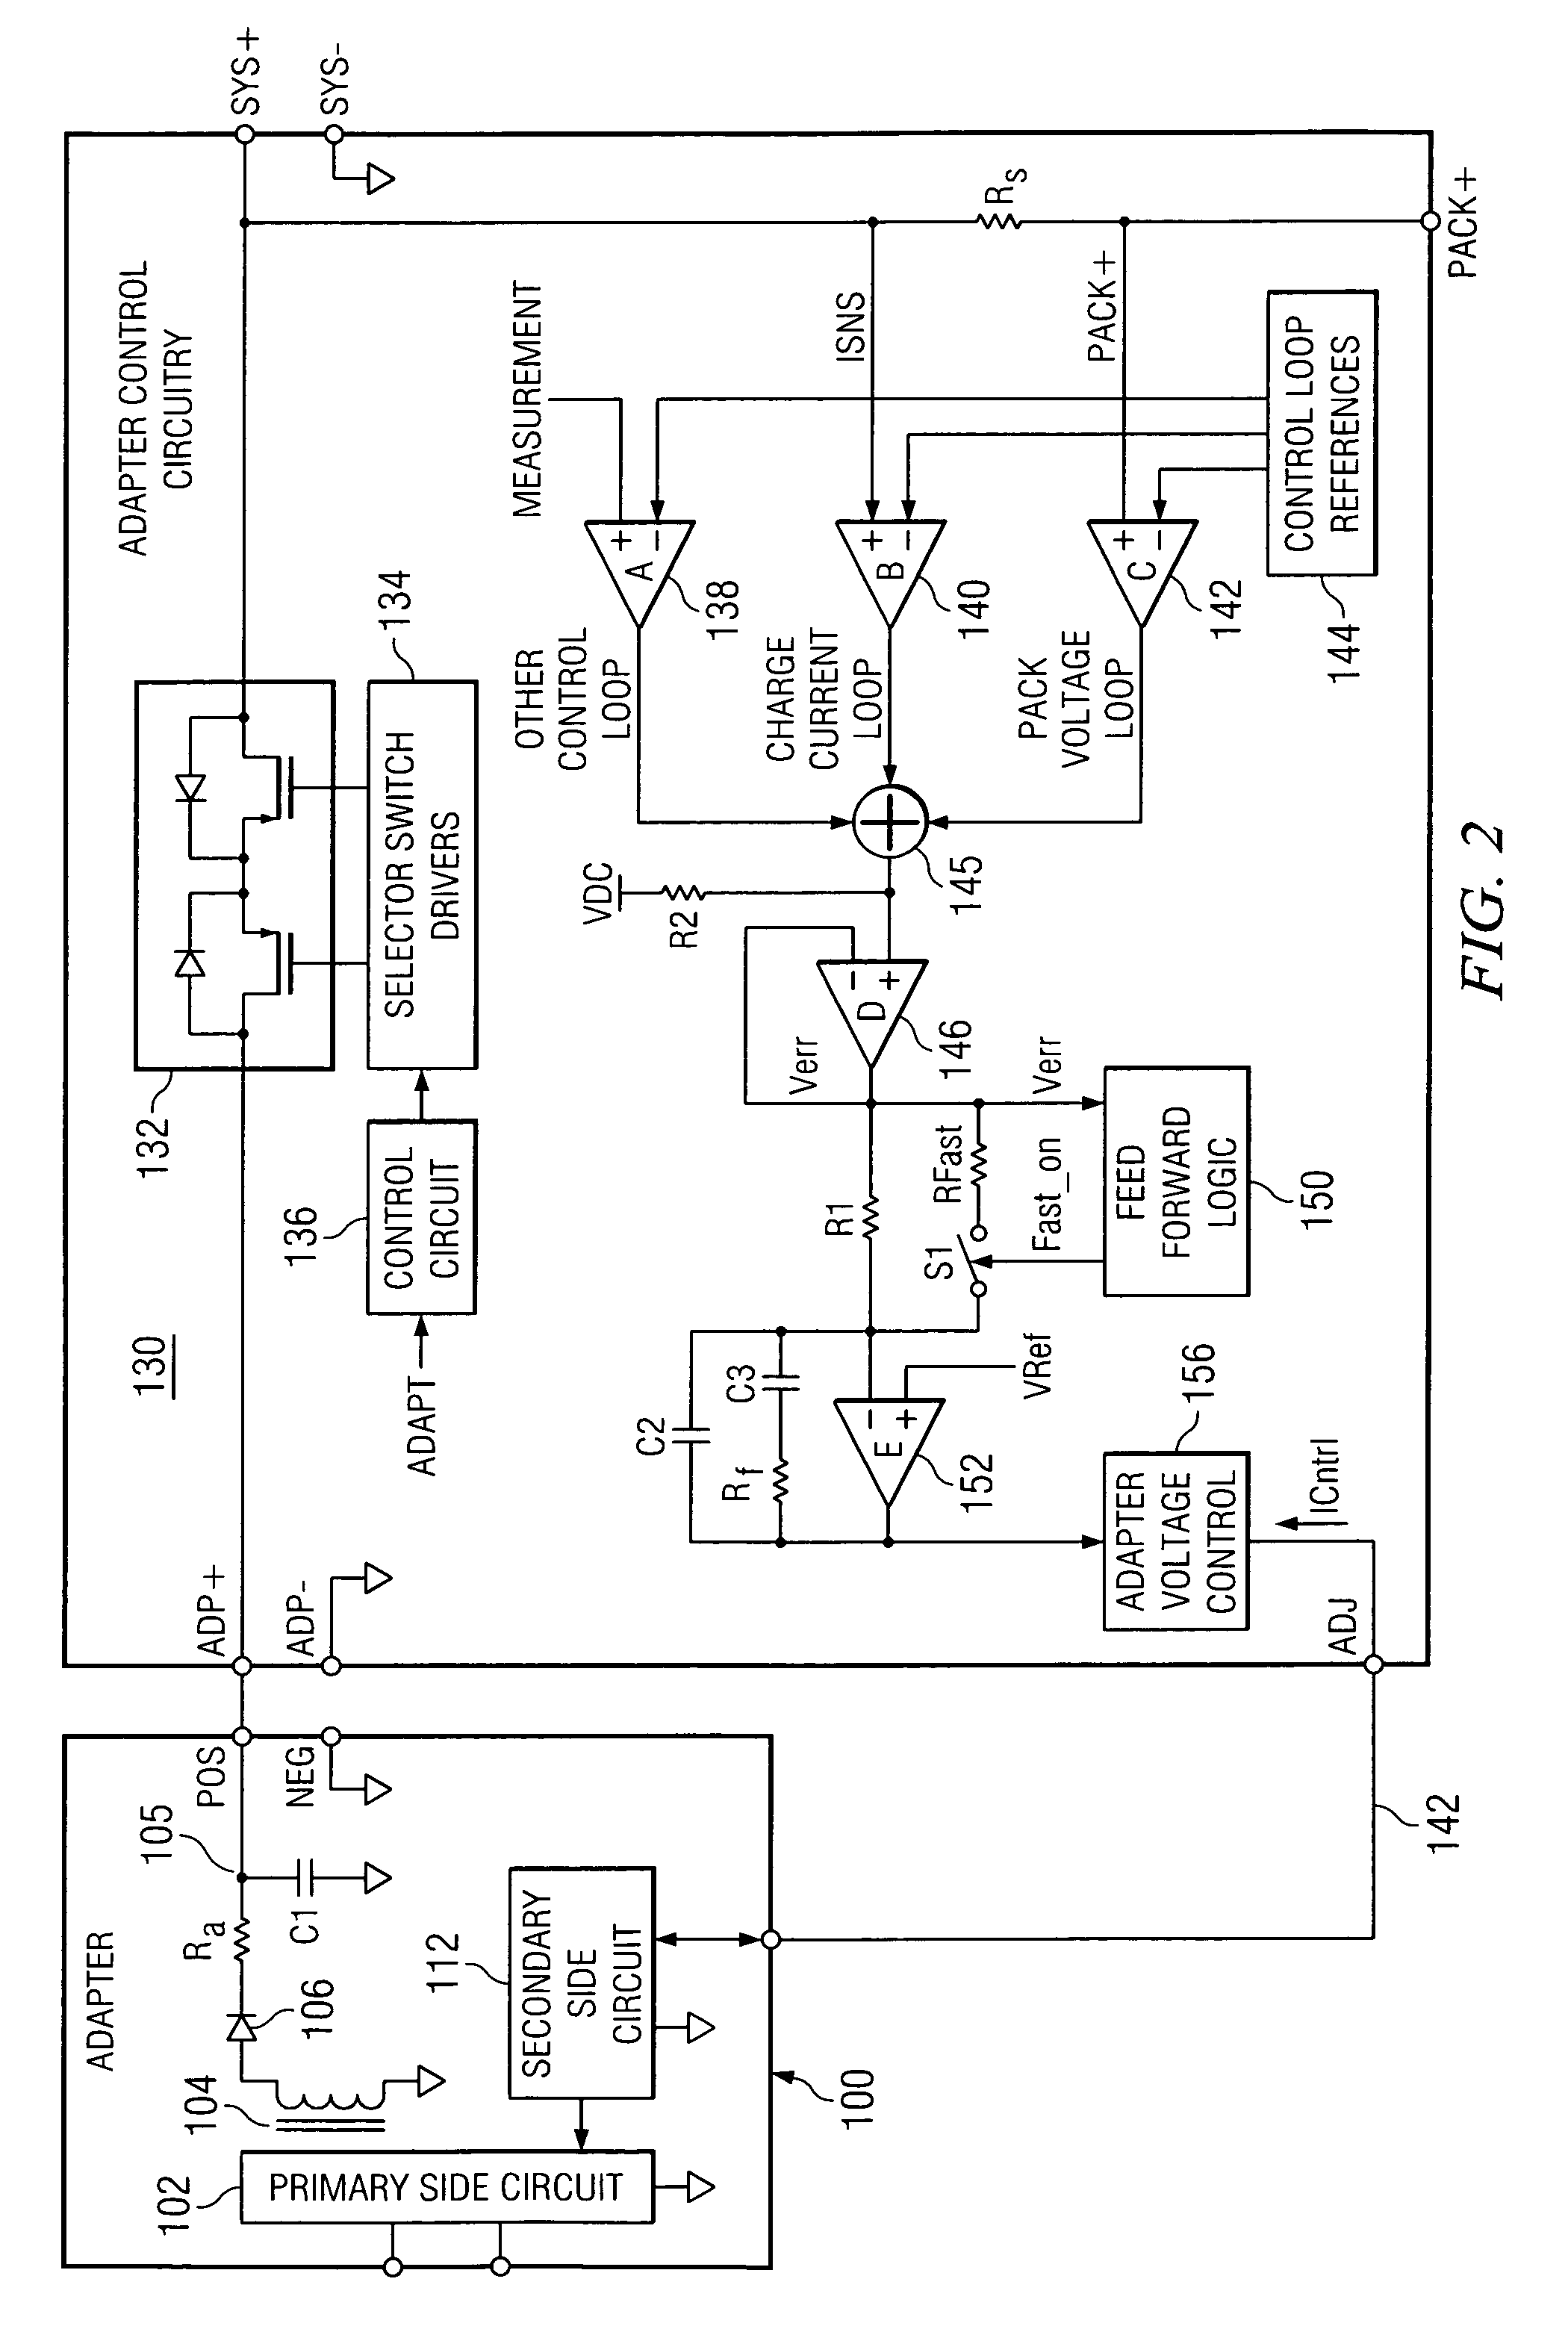 Feed-forward circuit for adjustable output voltage controller circuits